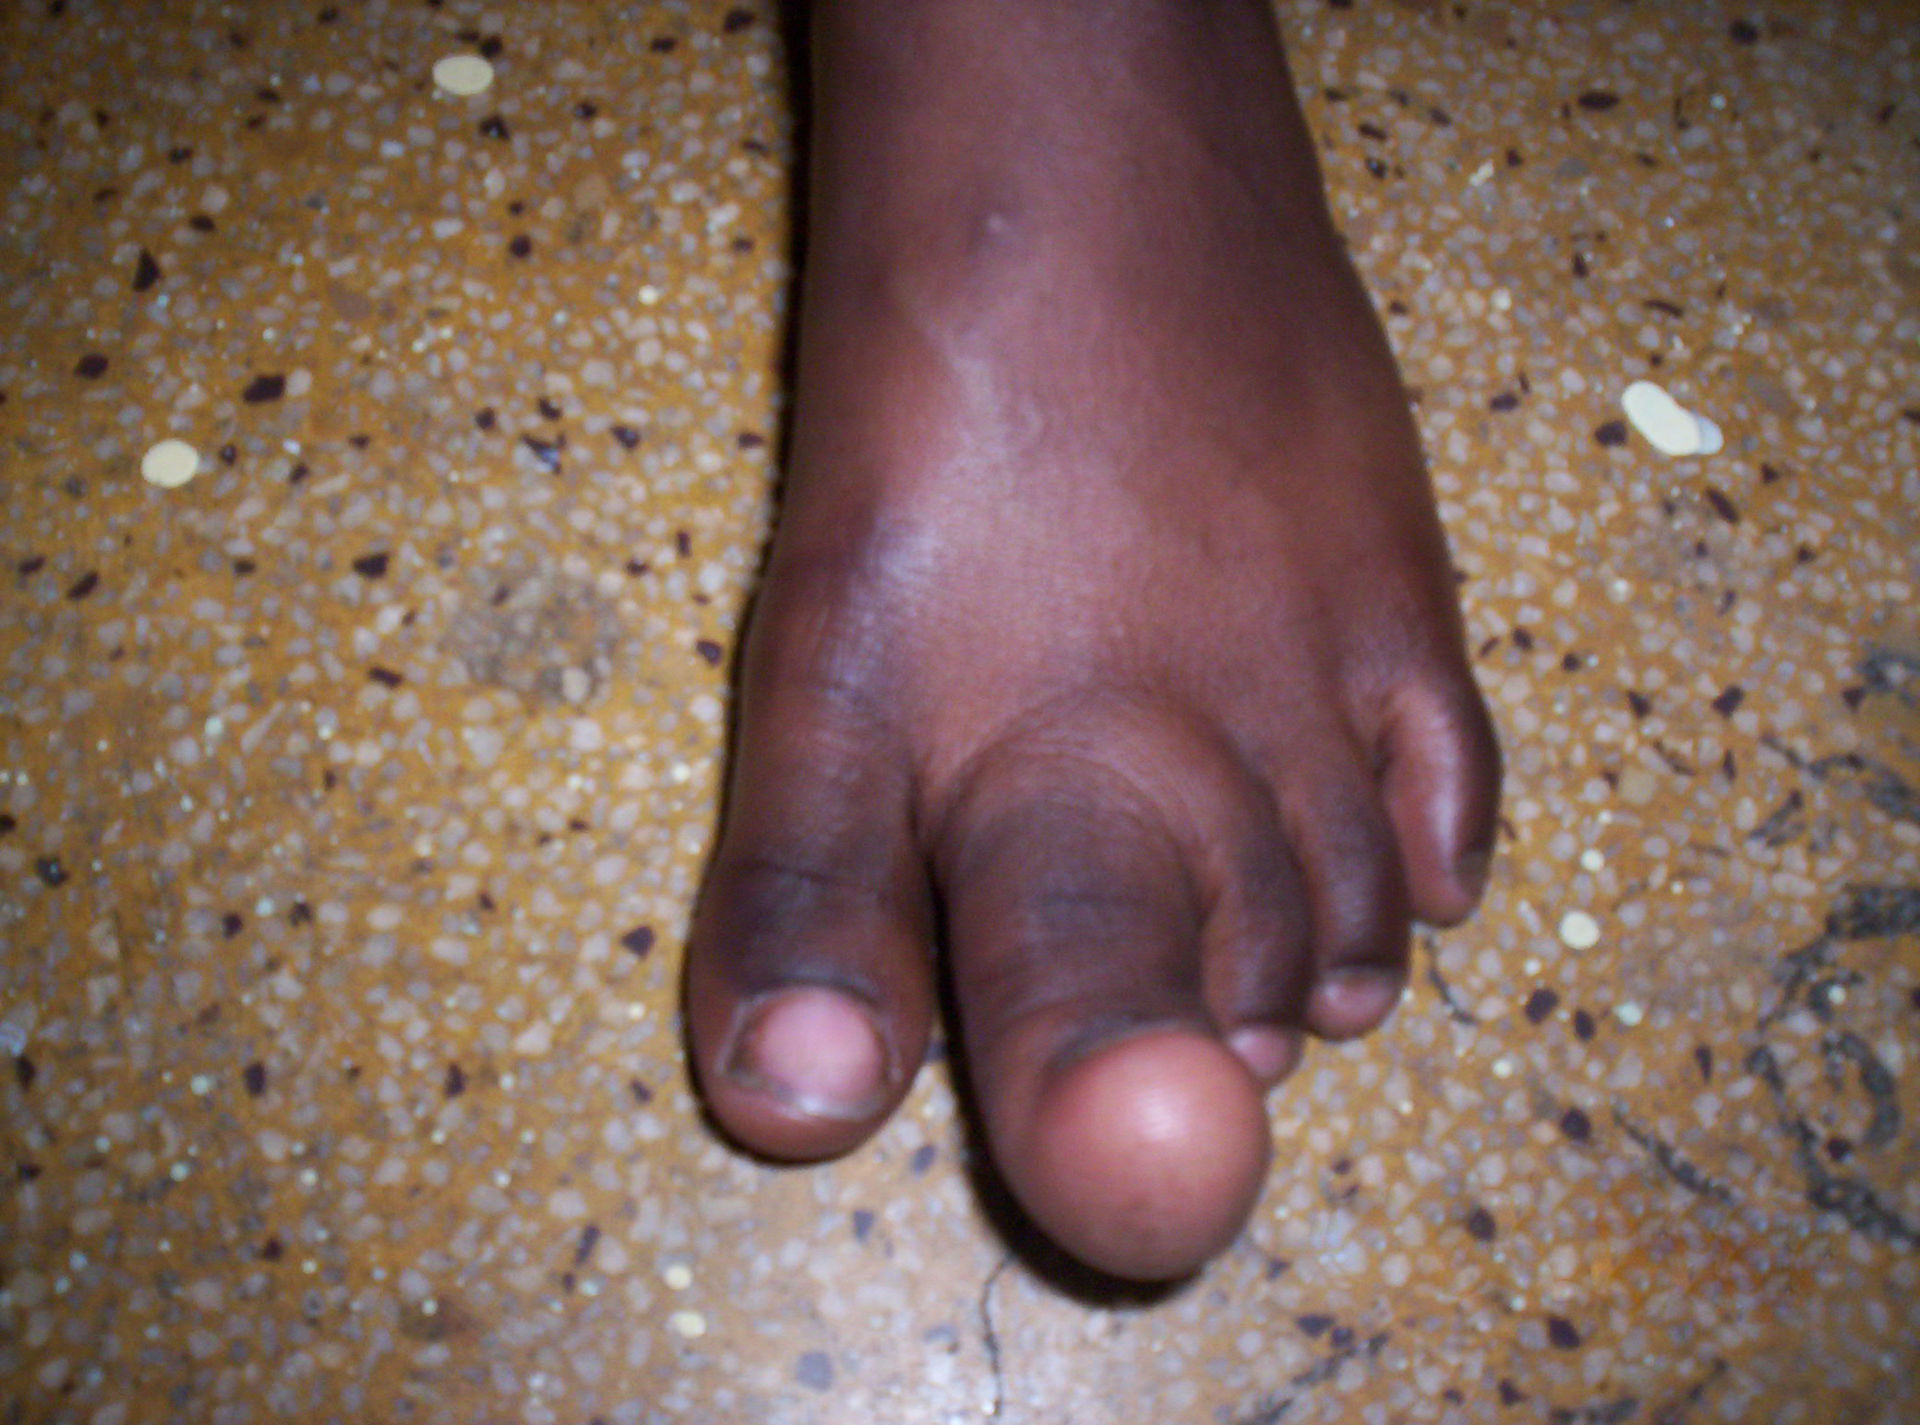 local gigantism of 2nd toe